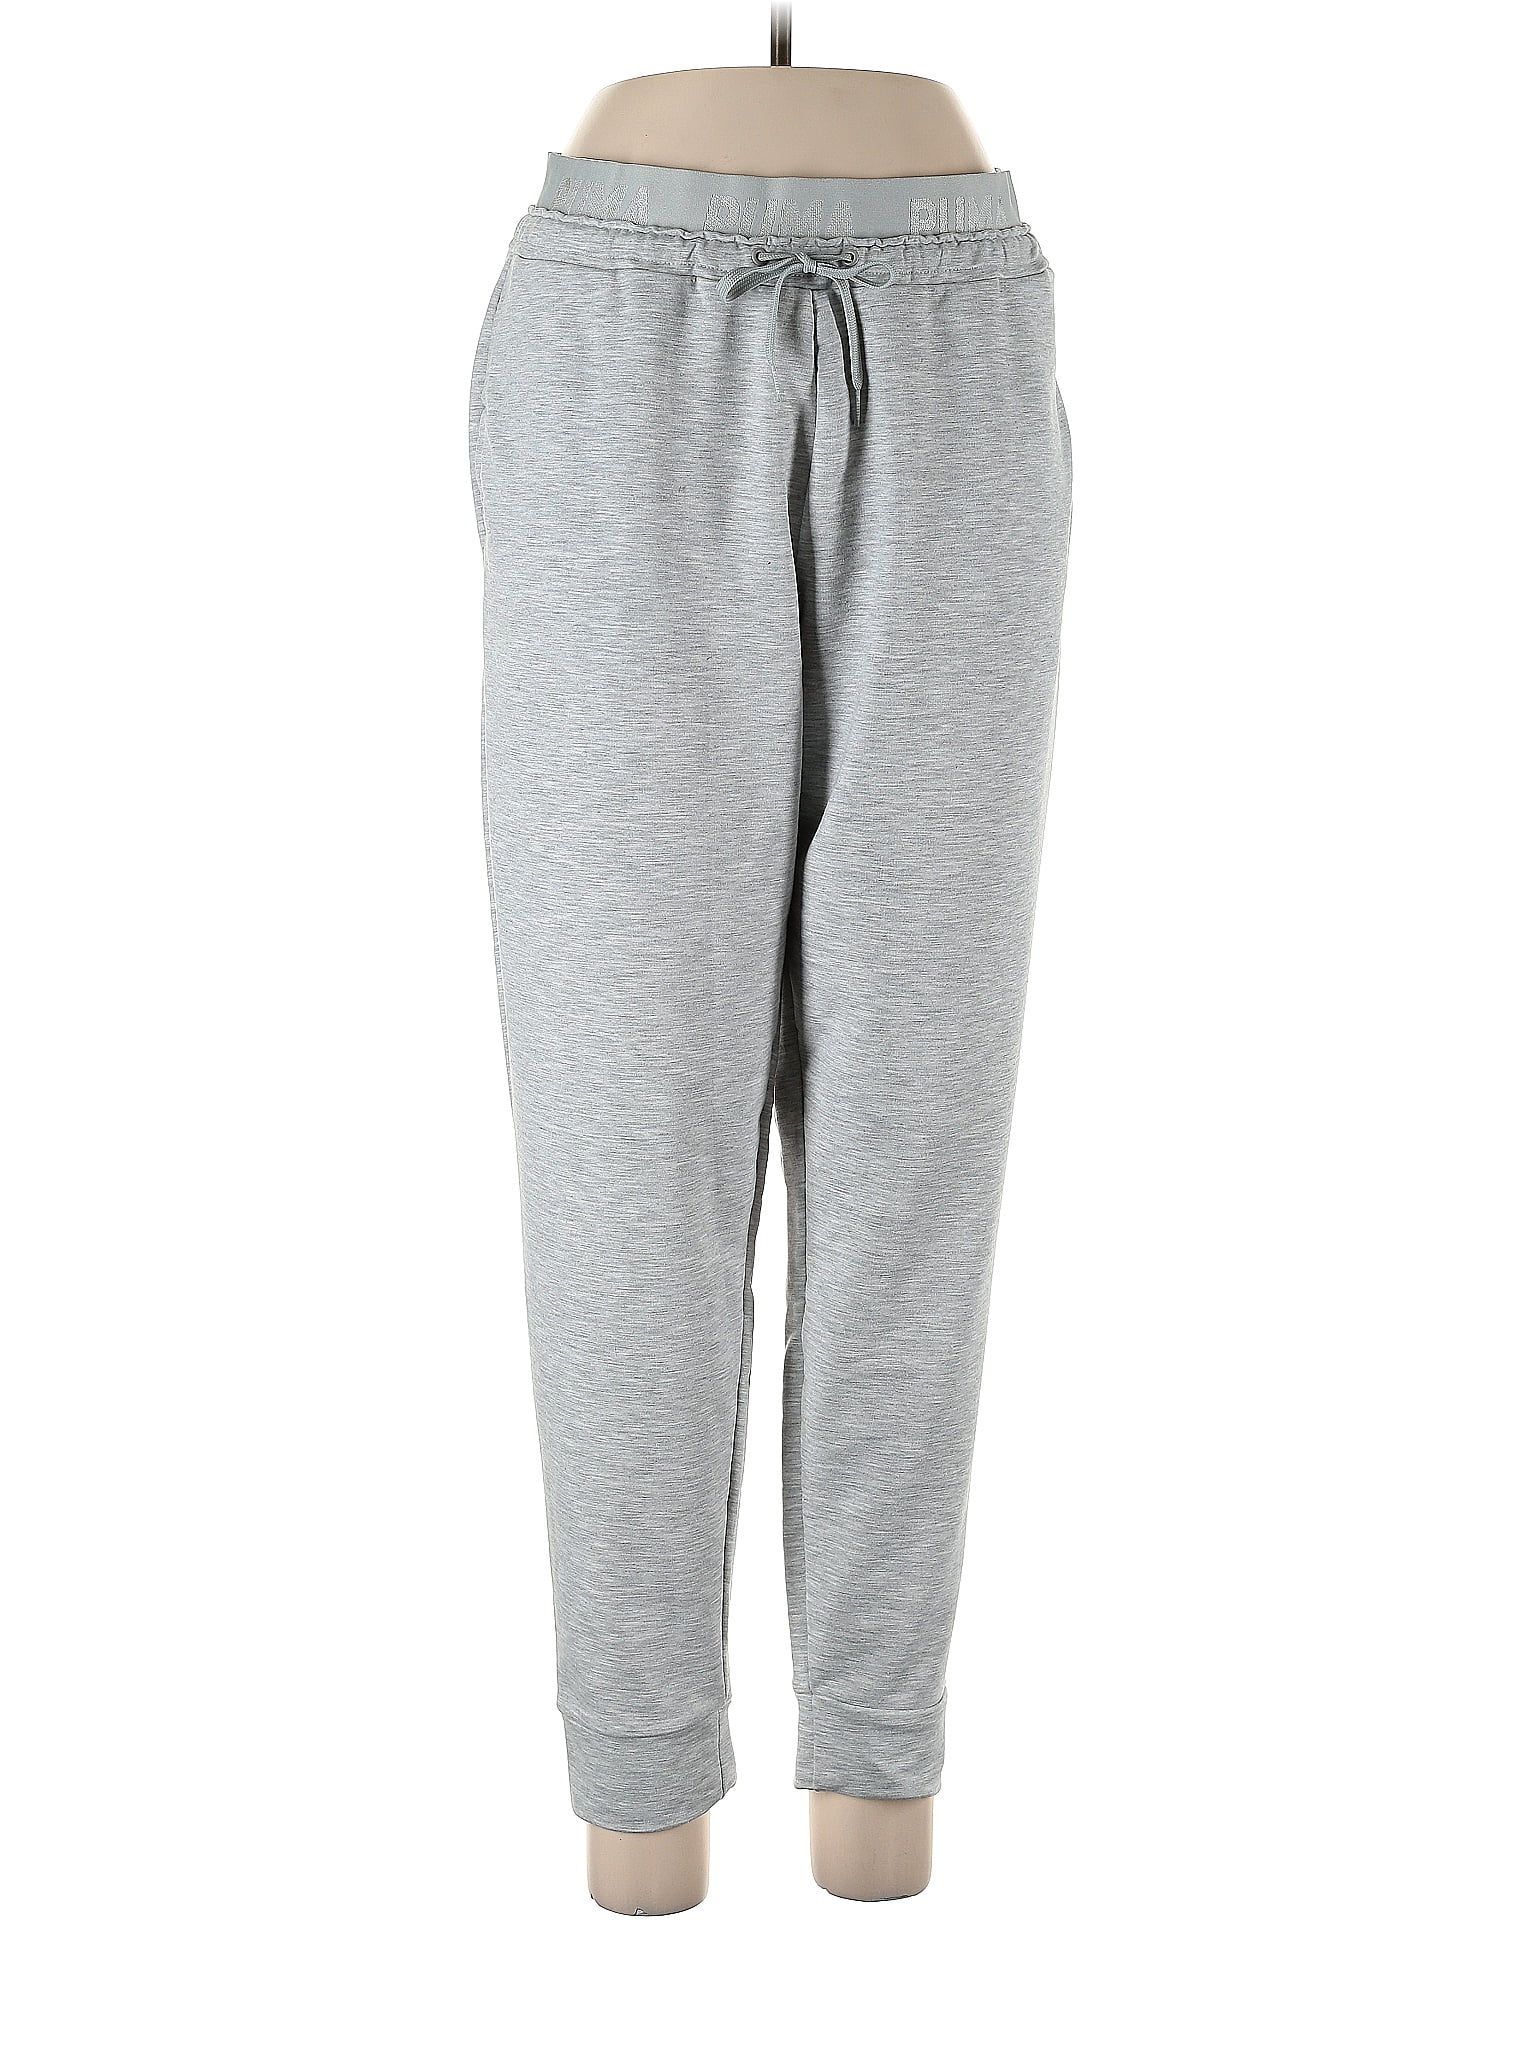 Sonoma Goods for Life Gray Sweatpants Size L - 52% off